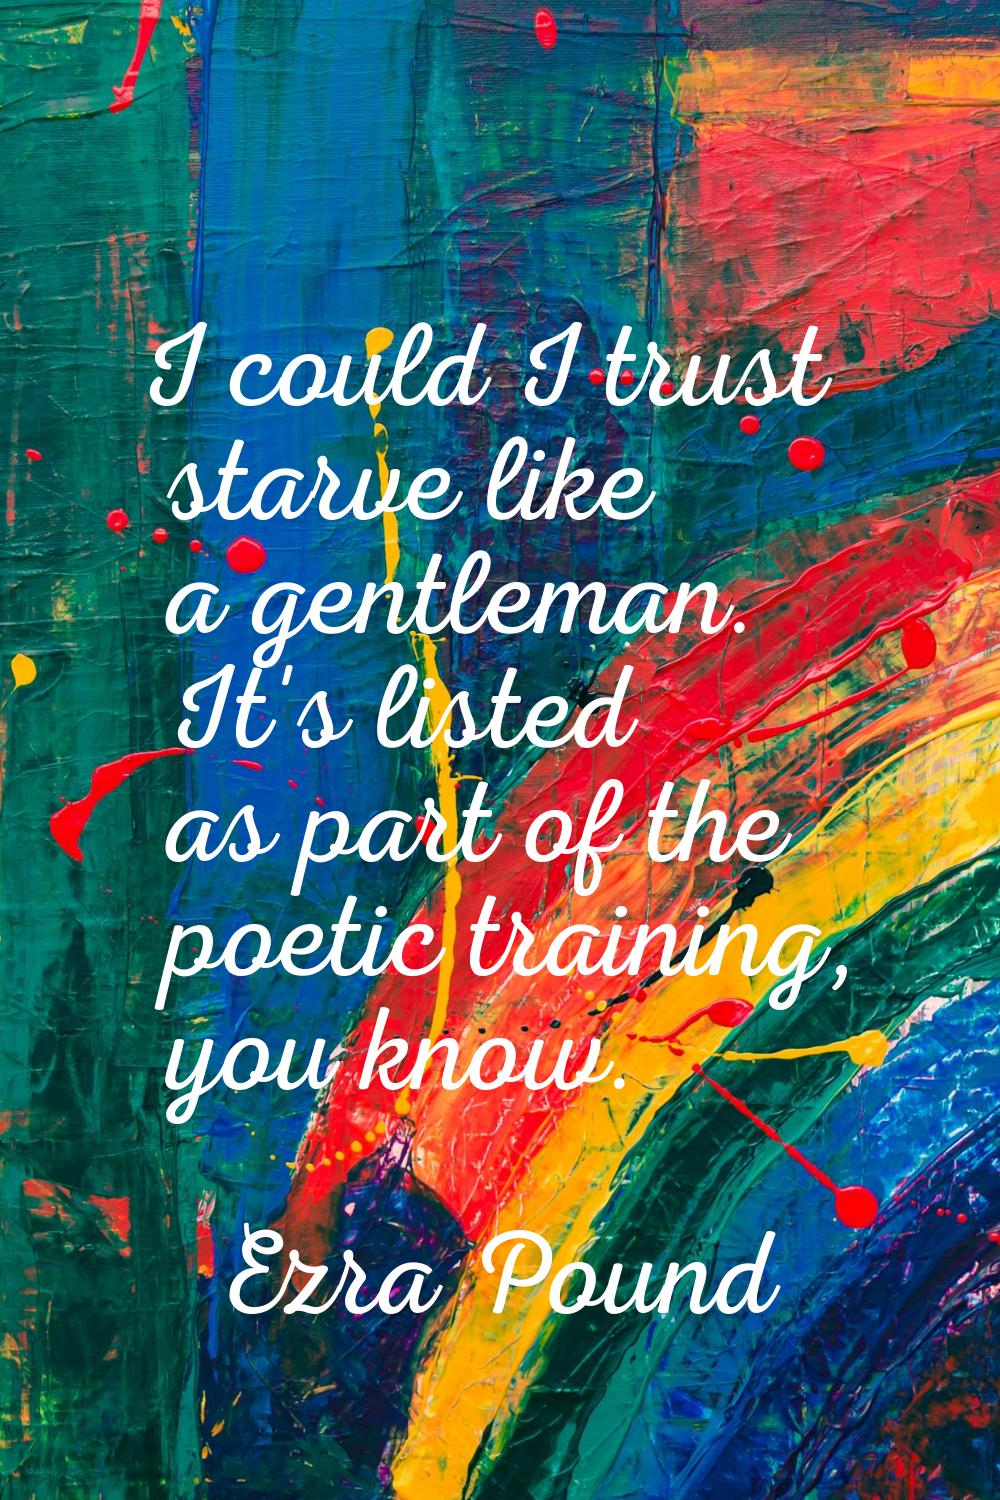 I could I trust starve like a gentleman. It's listed as part of the poetic training, you know.